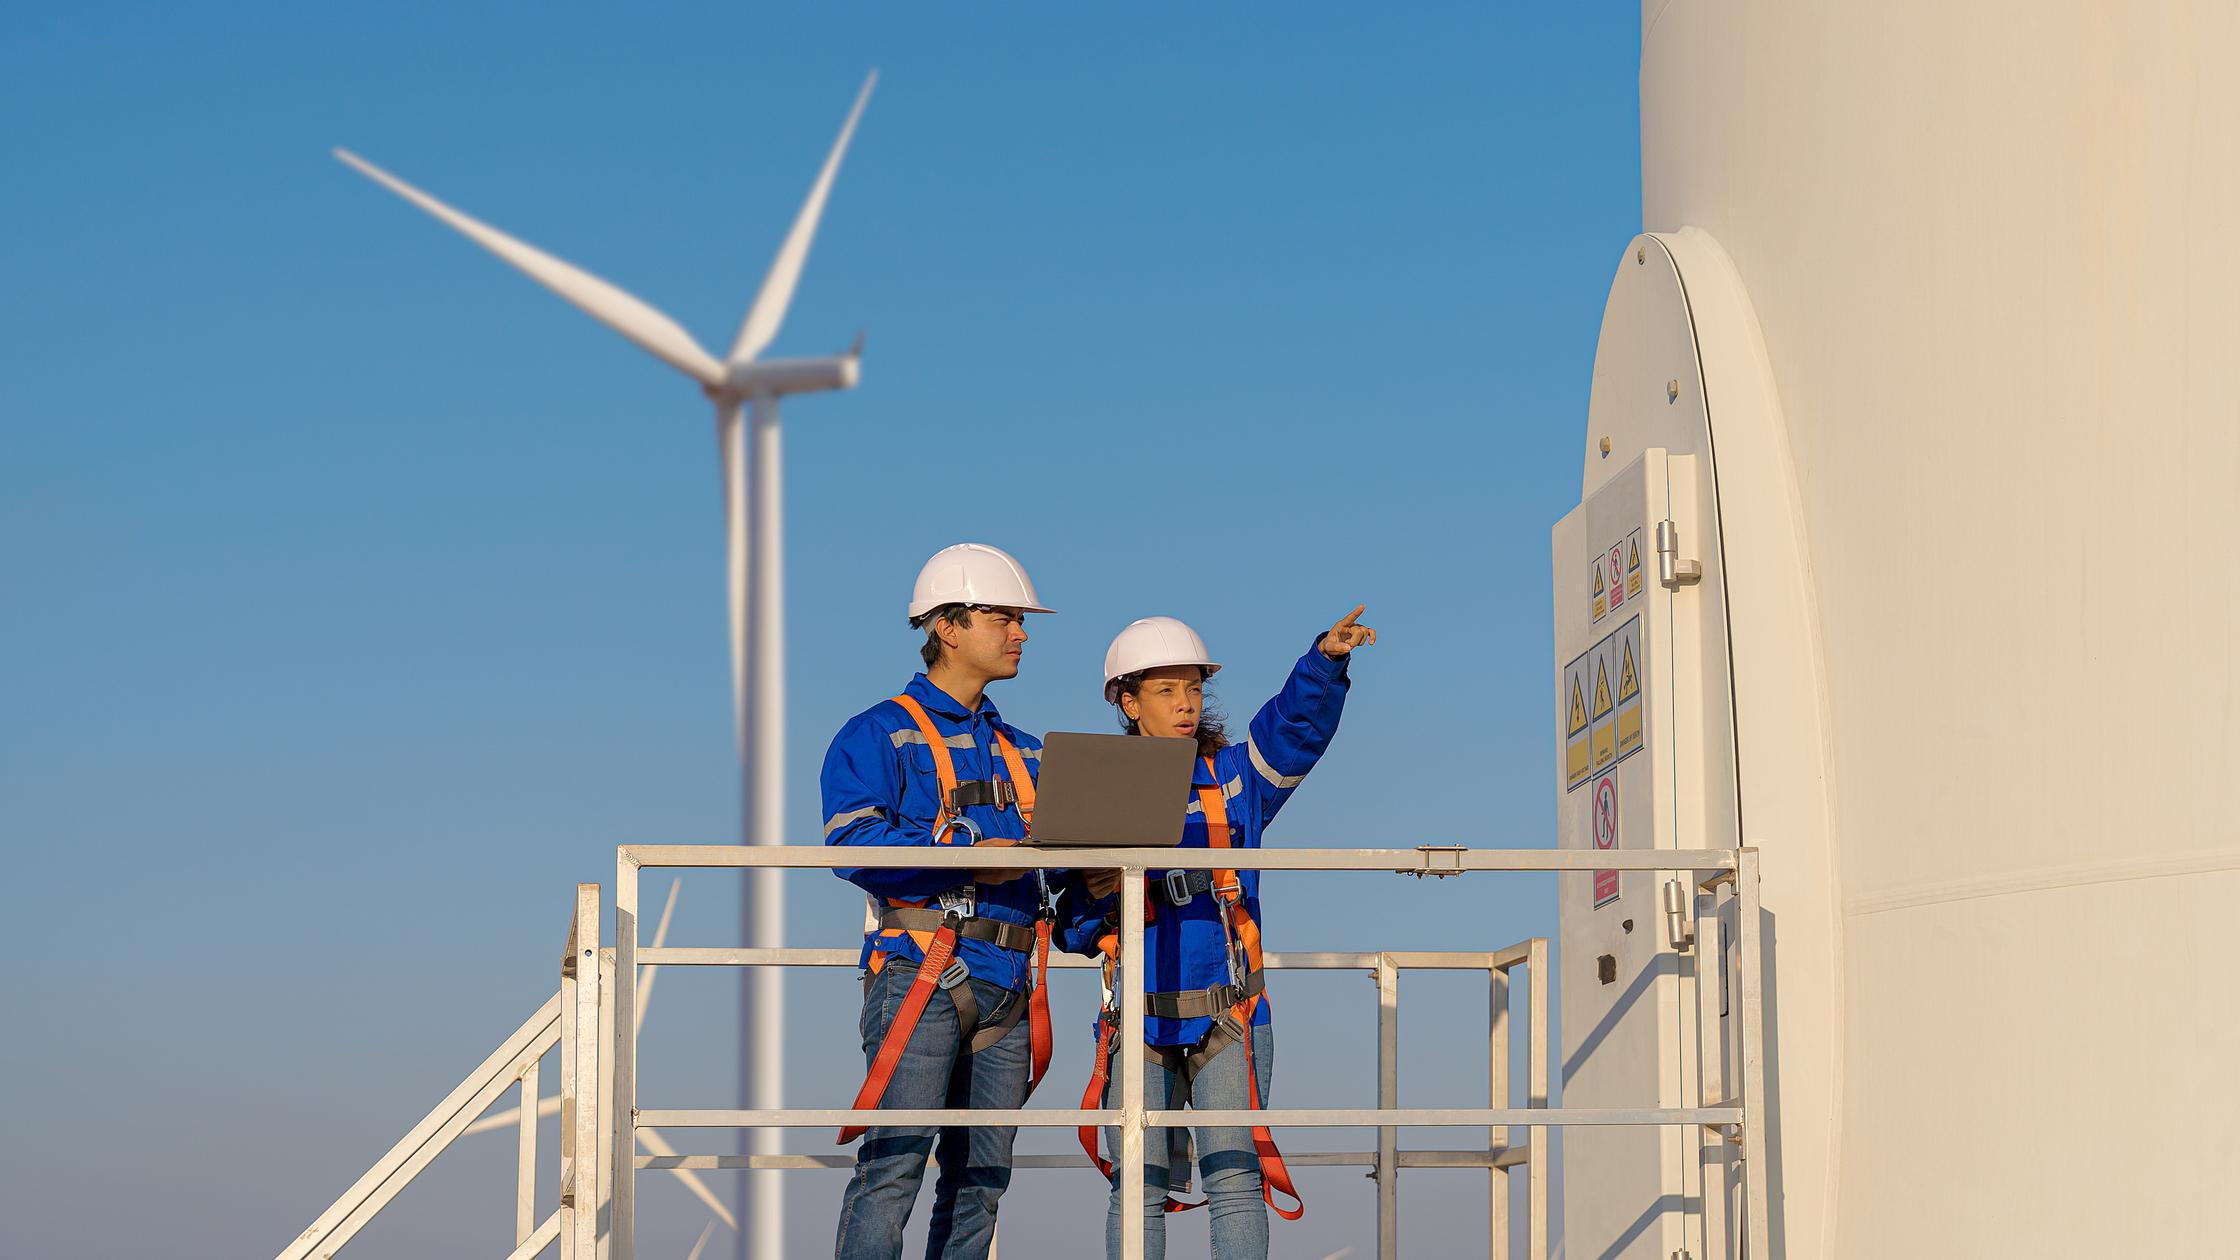 Quality - Maintenance engineers are checking wind turbines at wind power plant electric energy station